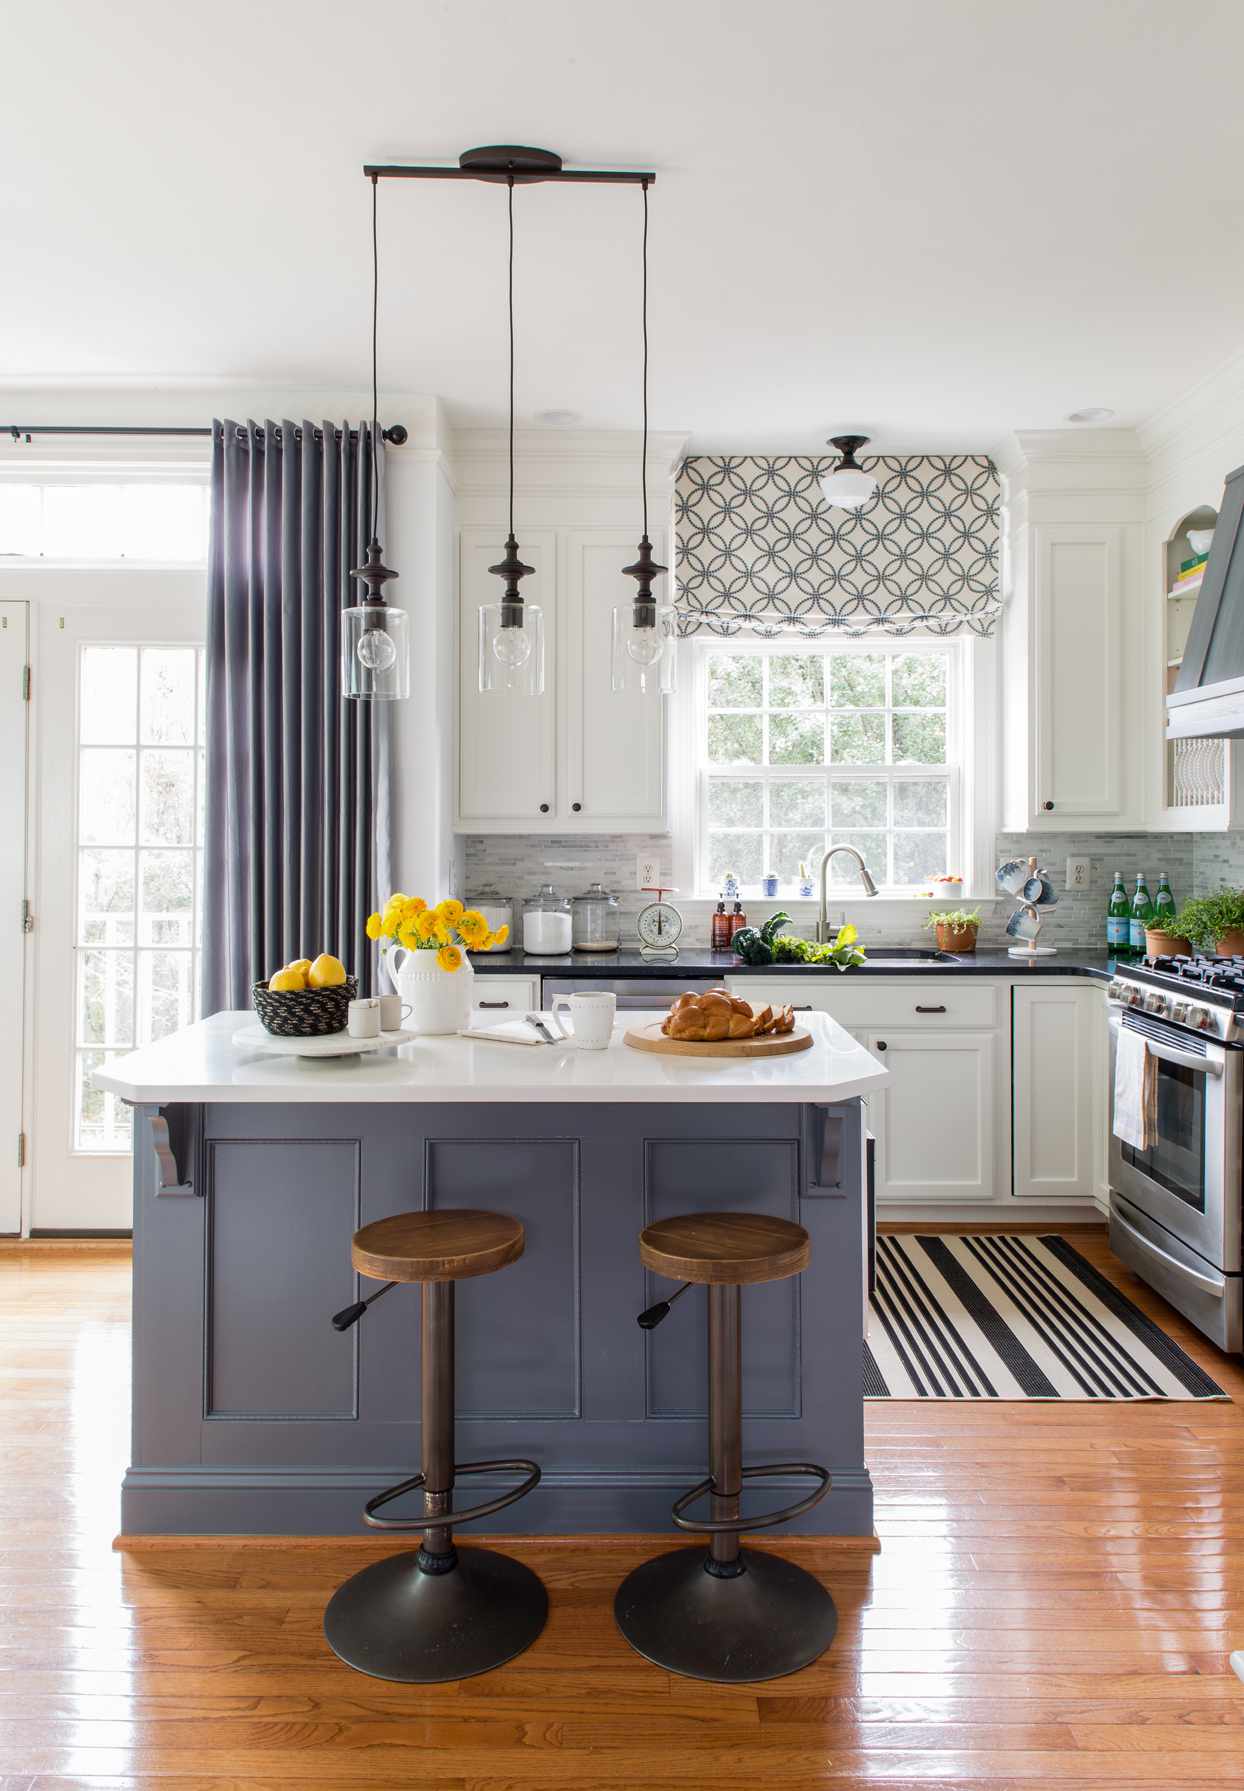 25 Contrasting Kitchen Island Ideas for a Stand Out Space   Better ...